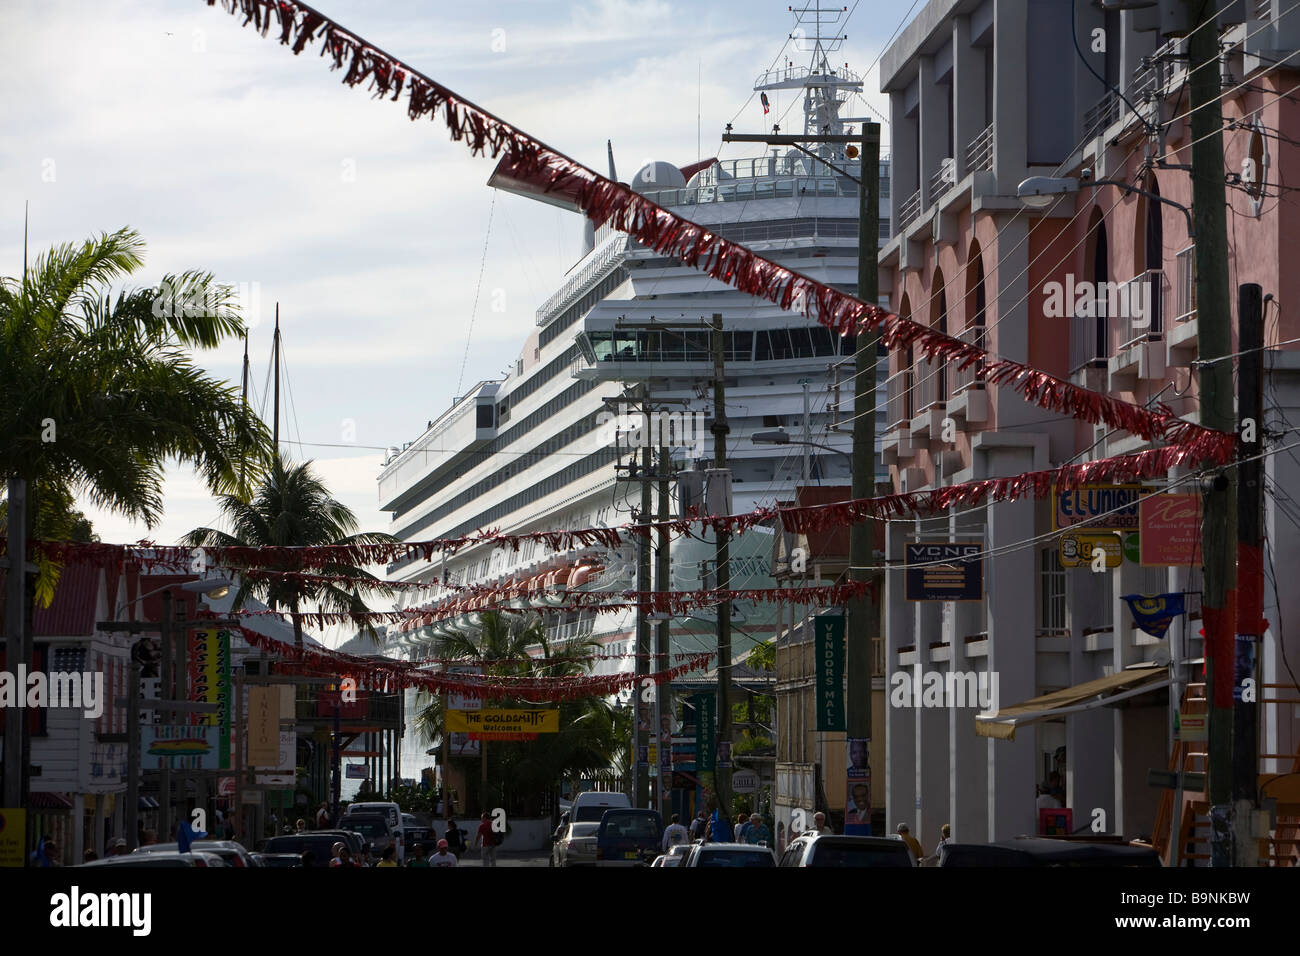 Cruise ship, Carnival Freedom, in port at St Johns Antigua Stock Photo